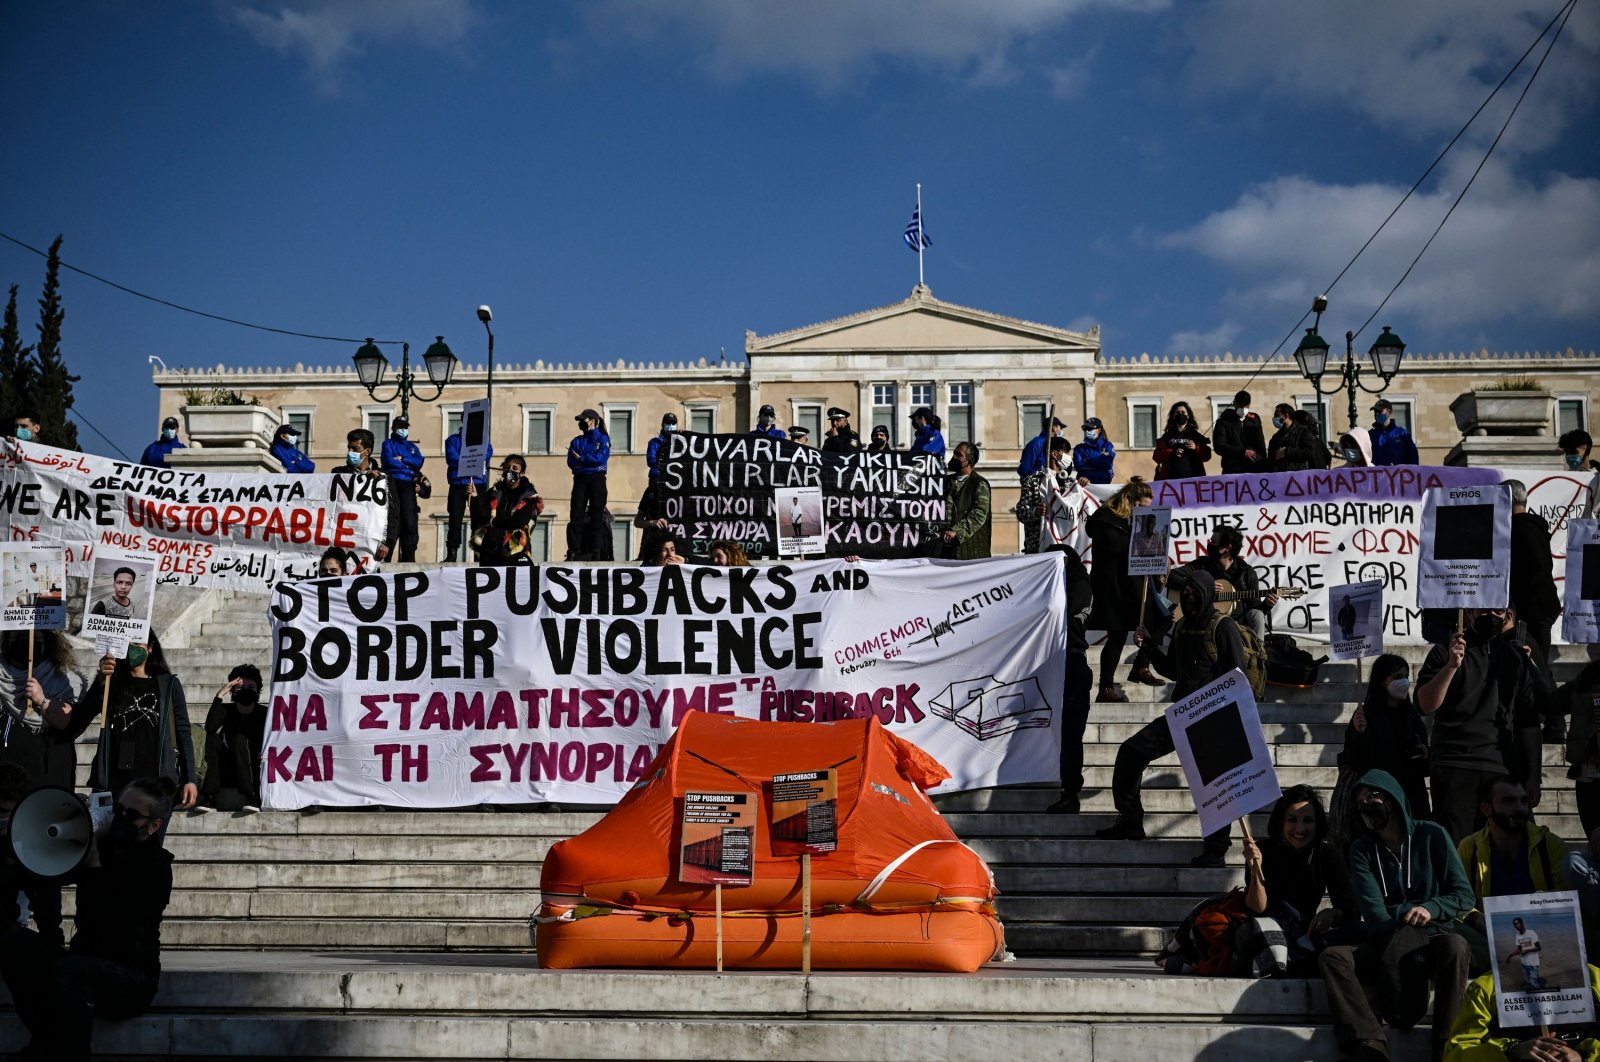 Protesters hold signs and banners as they stand next to a life raft during a demonstration in central Athens, Greece, on Feb. 6, 2022. (AFP Photo)